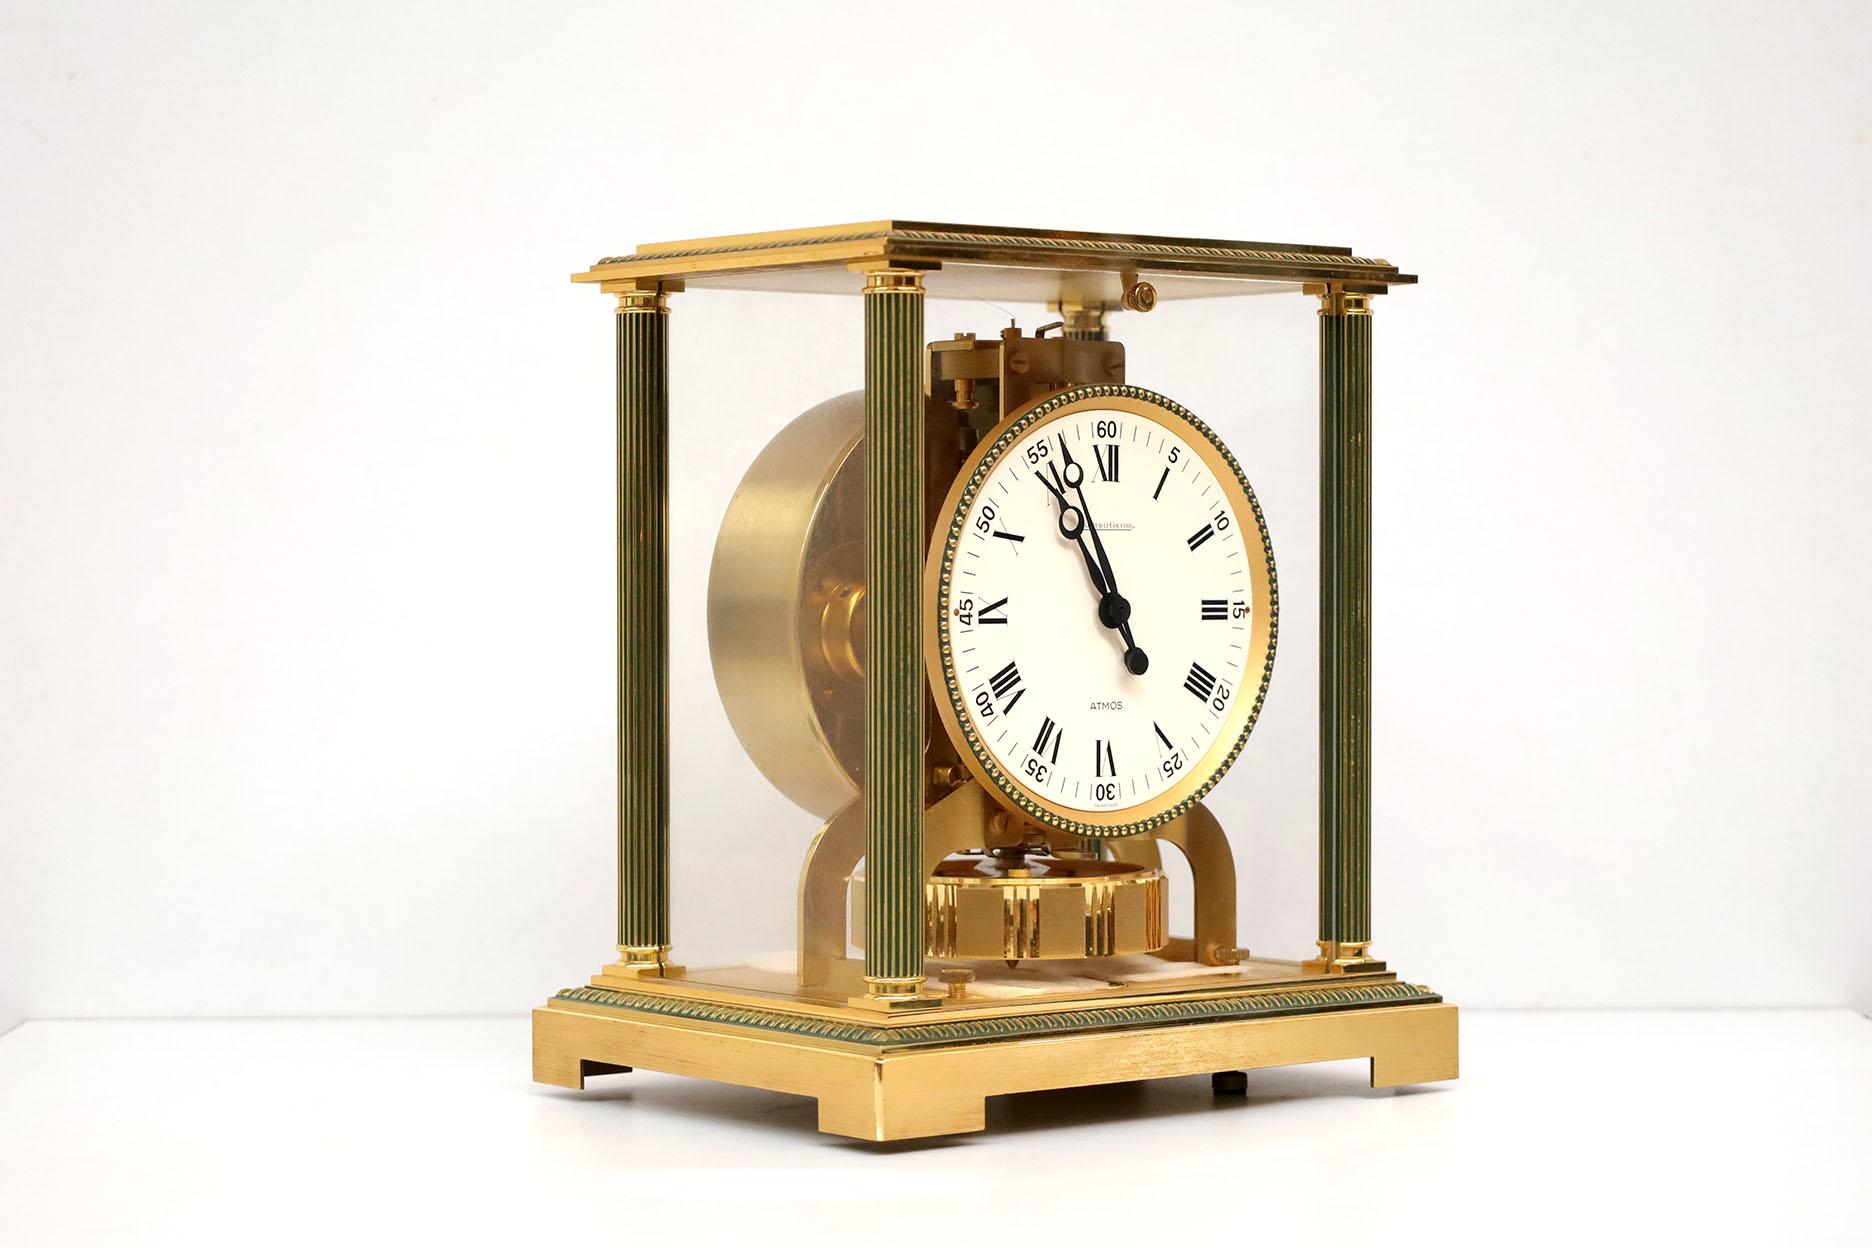 Jaeger LeCoultre Vendome Atmos Clock In Good Condition For Sale In Mérida, YU